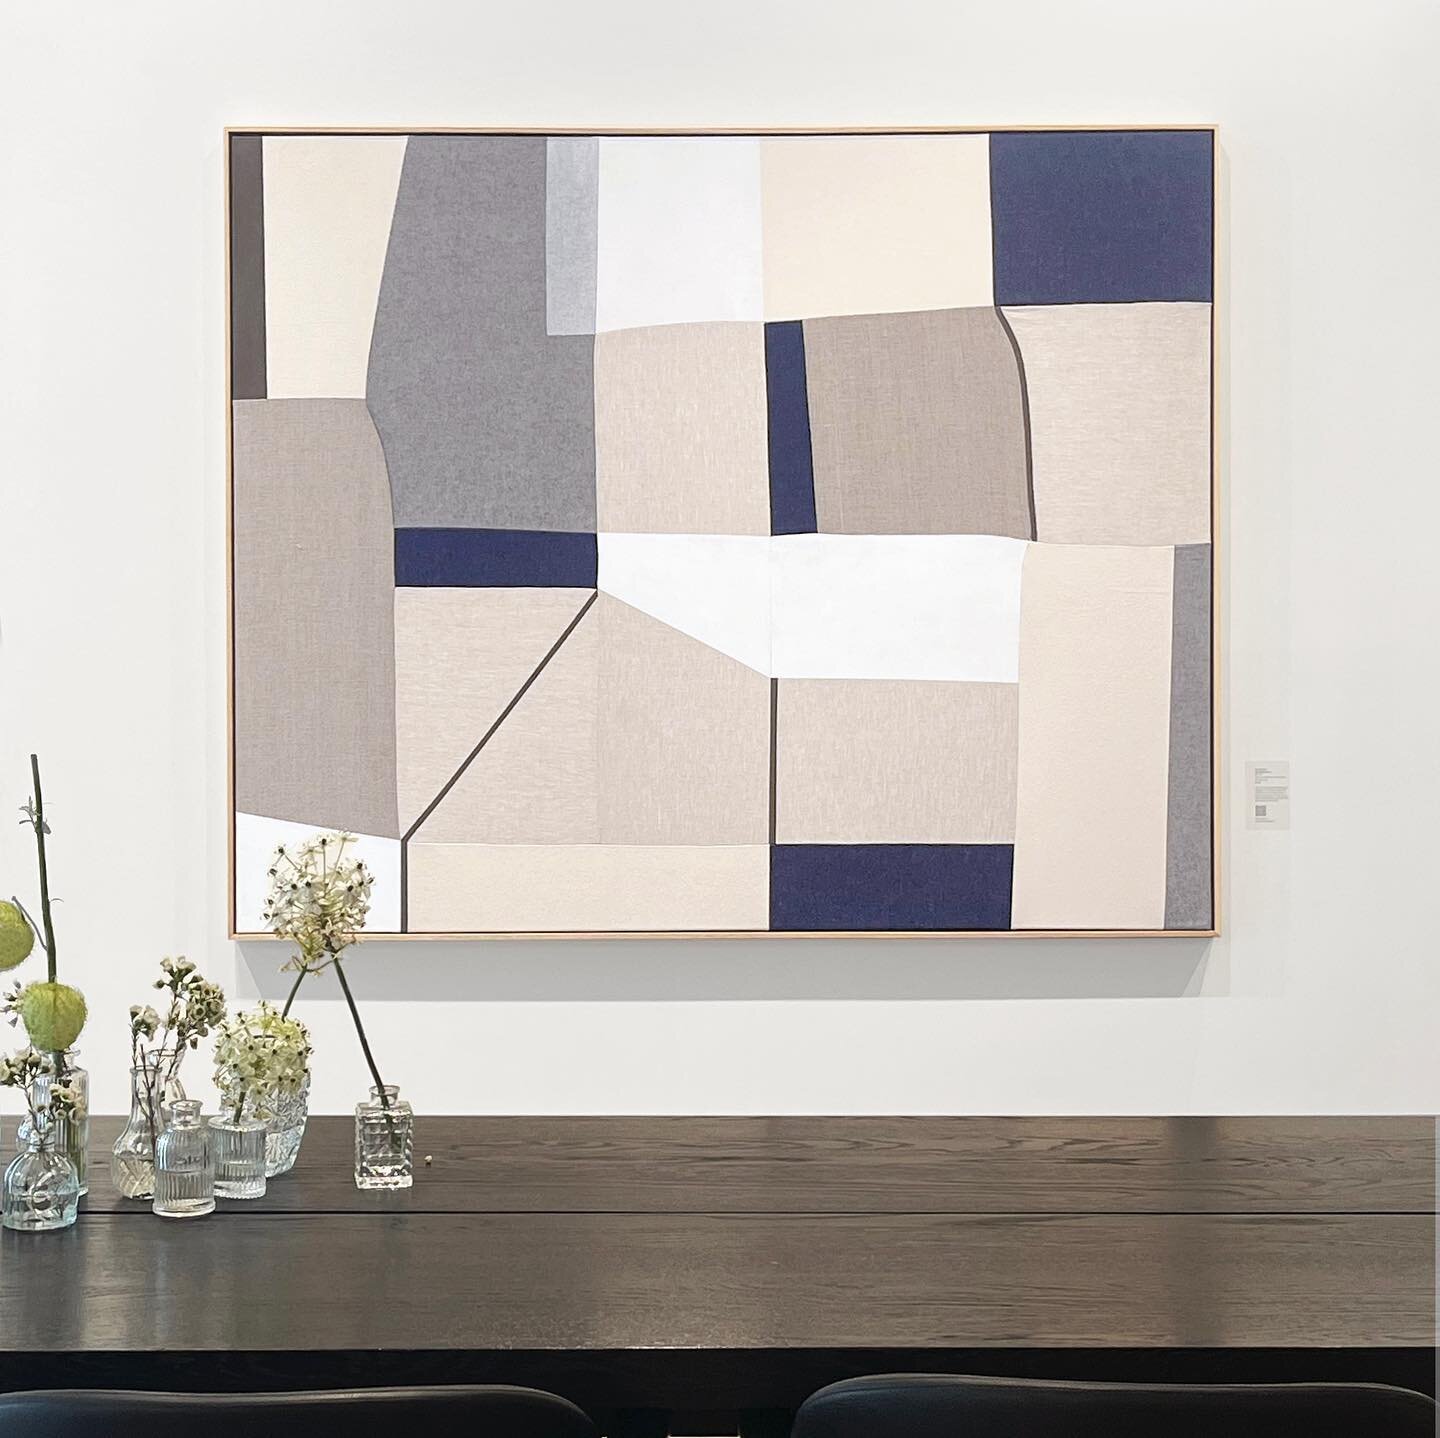 Harvested Visions, 48&rdquo;x60&rdquo; Linen, denim, canvas and acrylic. Framed in Ash. 

On view @sundaysfurniture 
113 Ossington Ave. Toronto

#torontoartist #canadianfurniture #canadianartist #wallart #supporttorontoartists